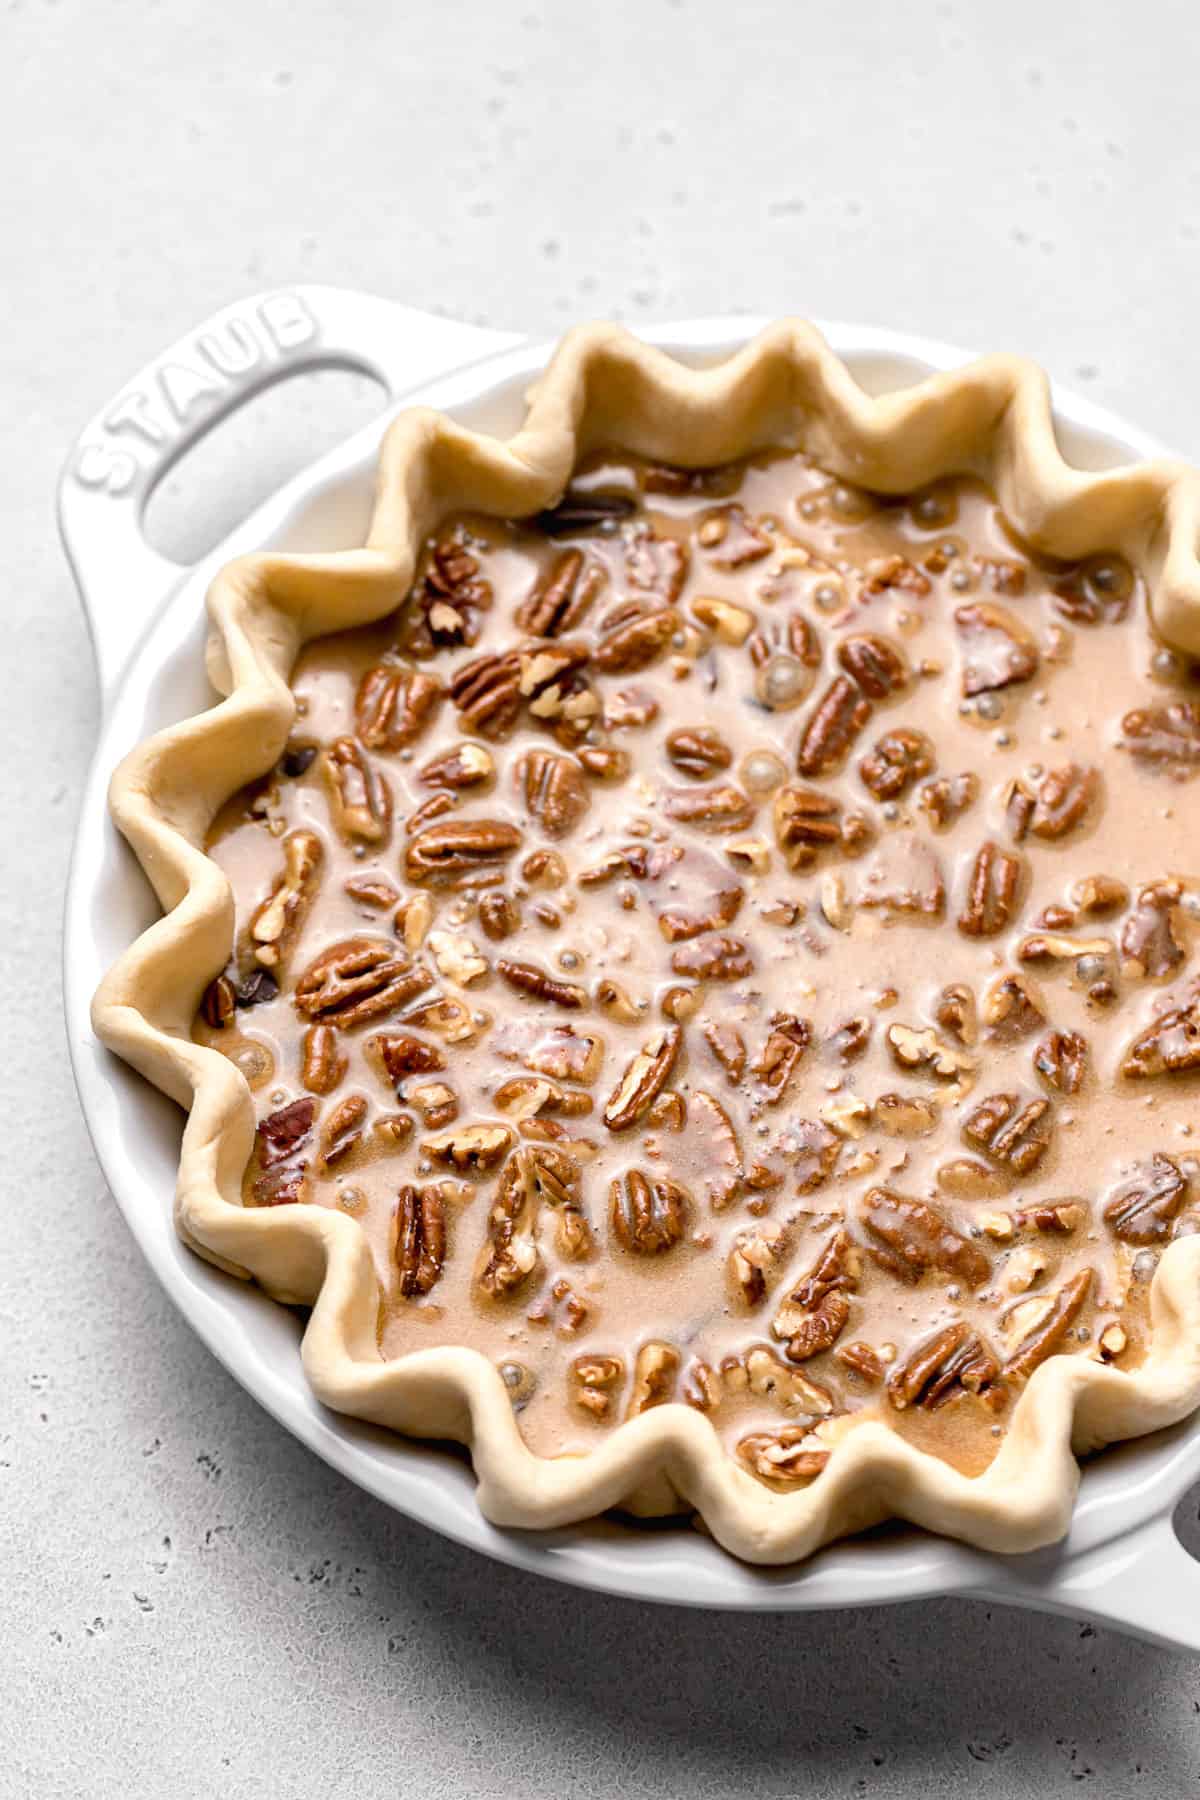 caramel filling poured over pecans and chocolate chips in pie dough.